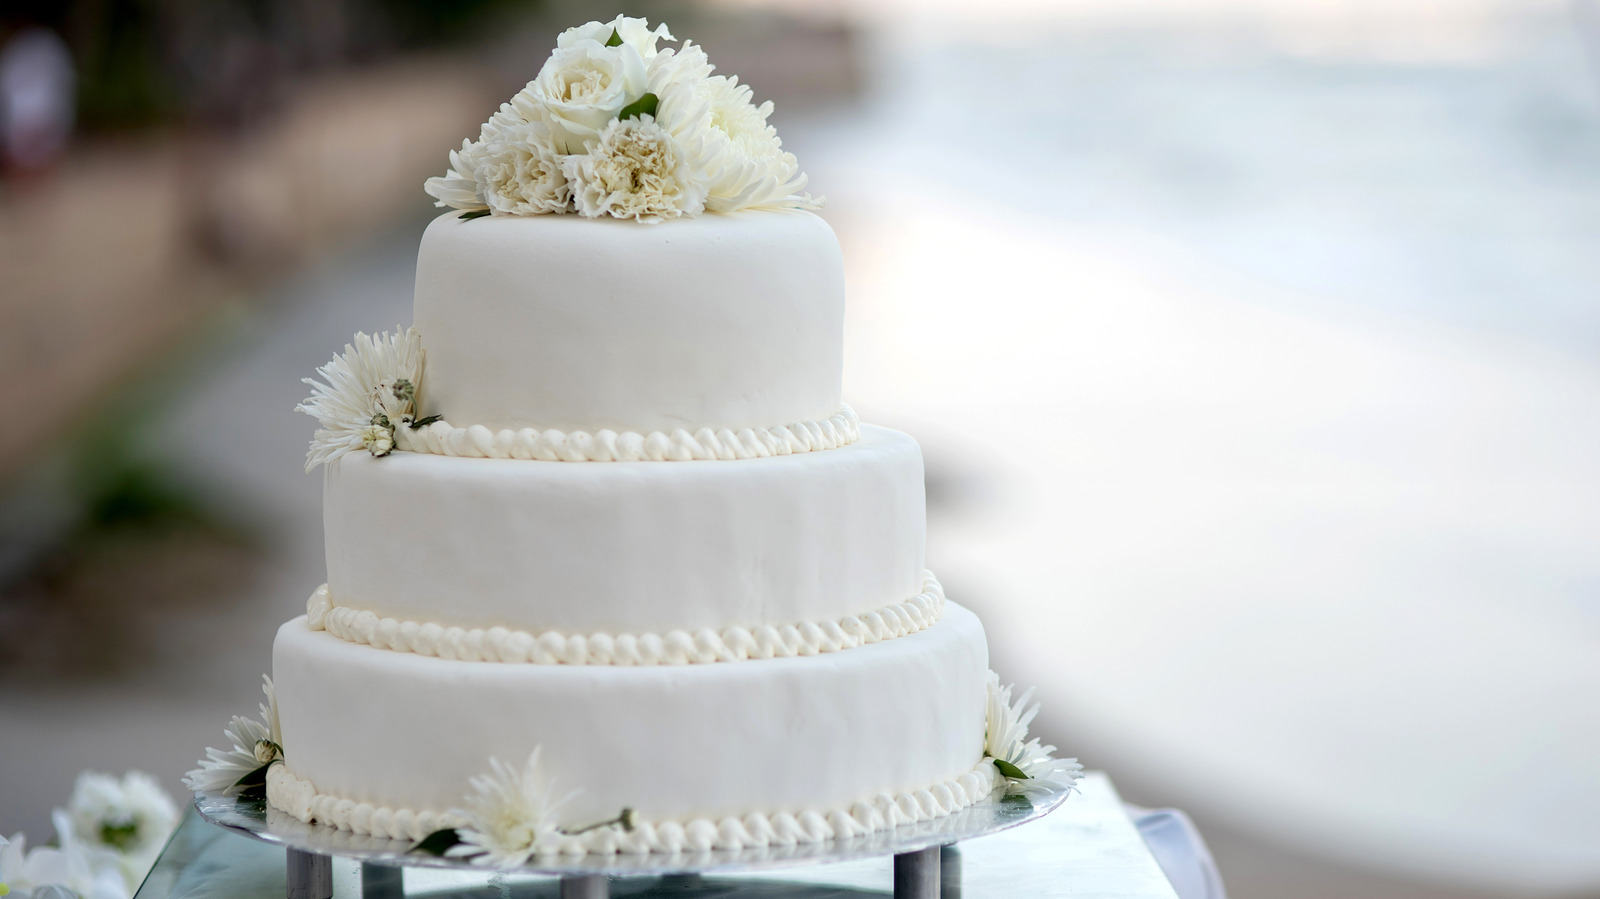 The Most Popular Wedding Cake Flavor Is Just What You'd Expect